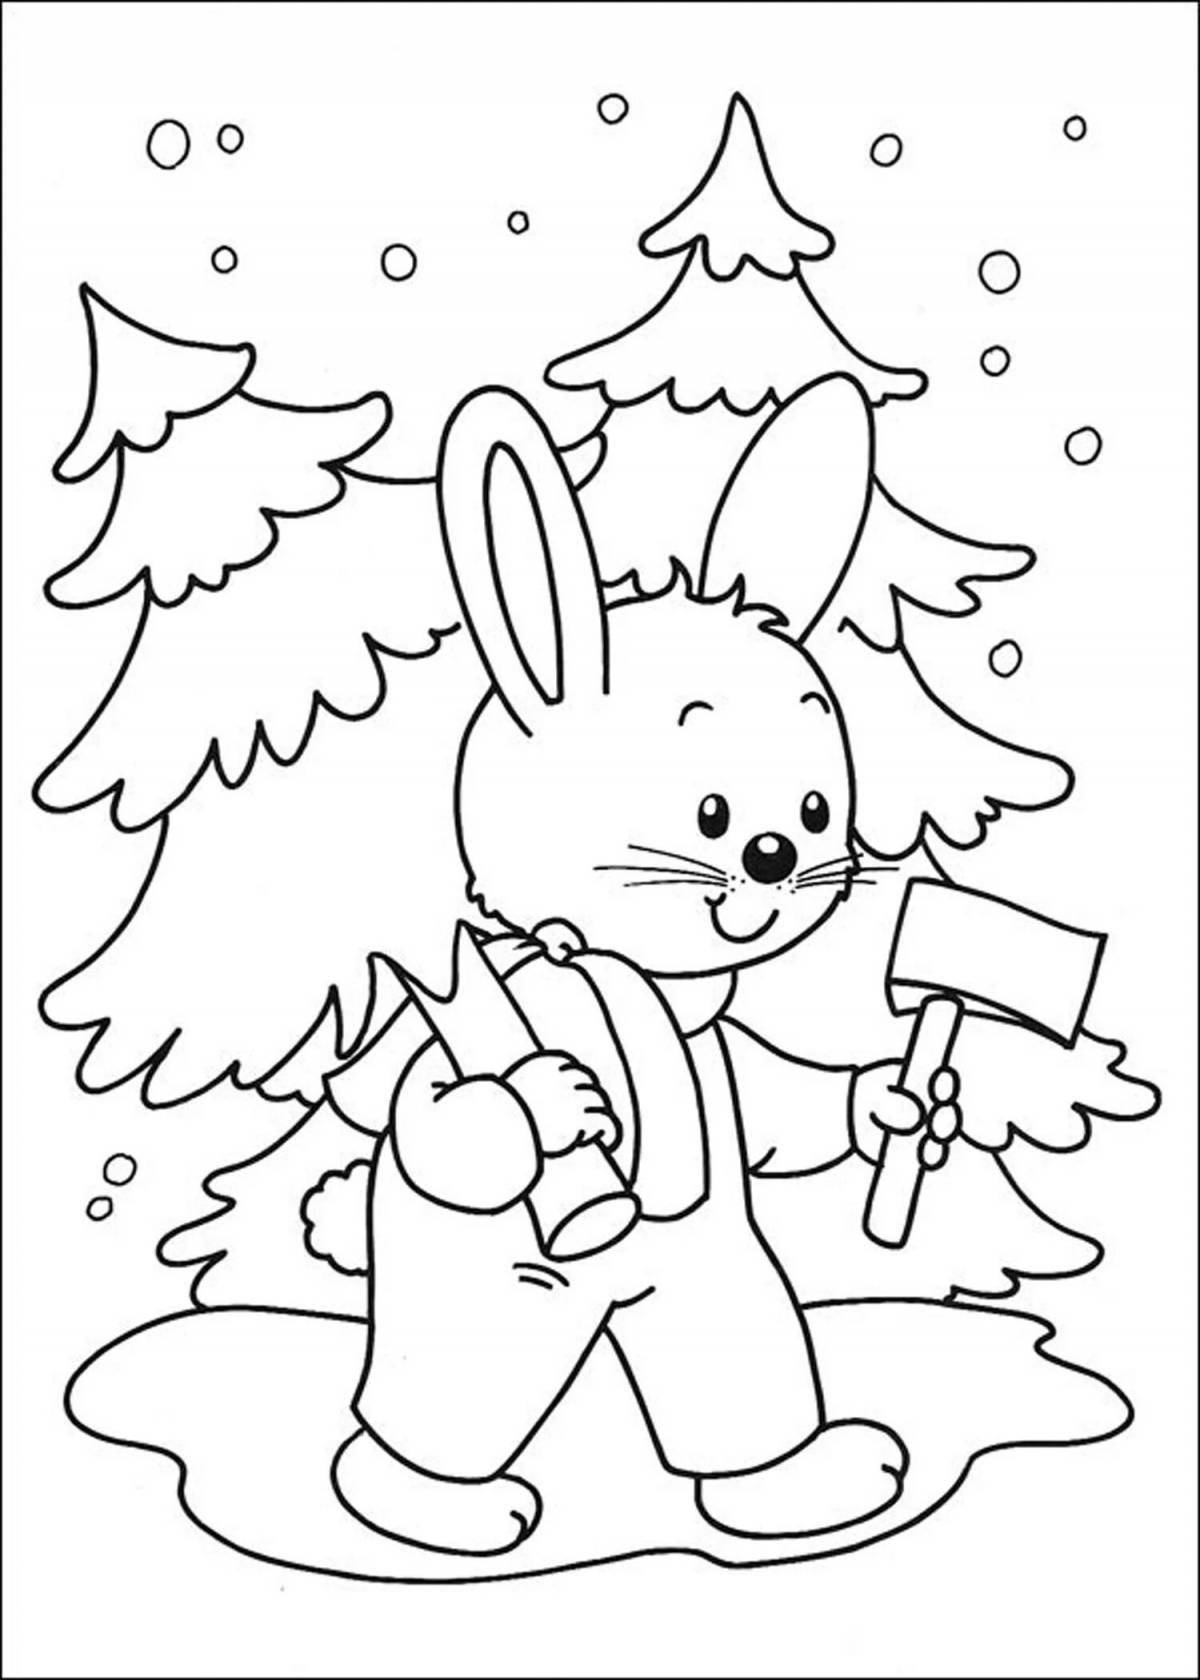 Funny hare and tree coloring